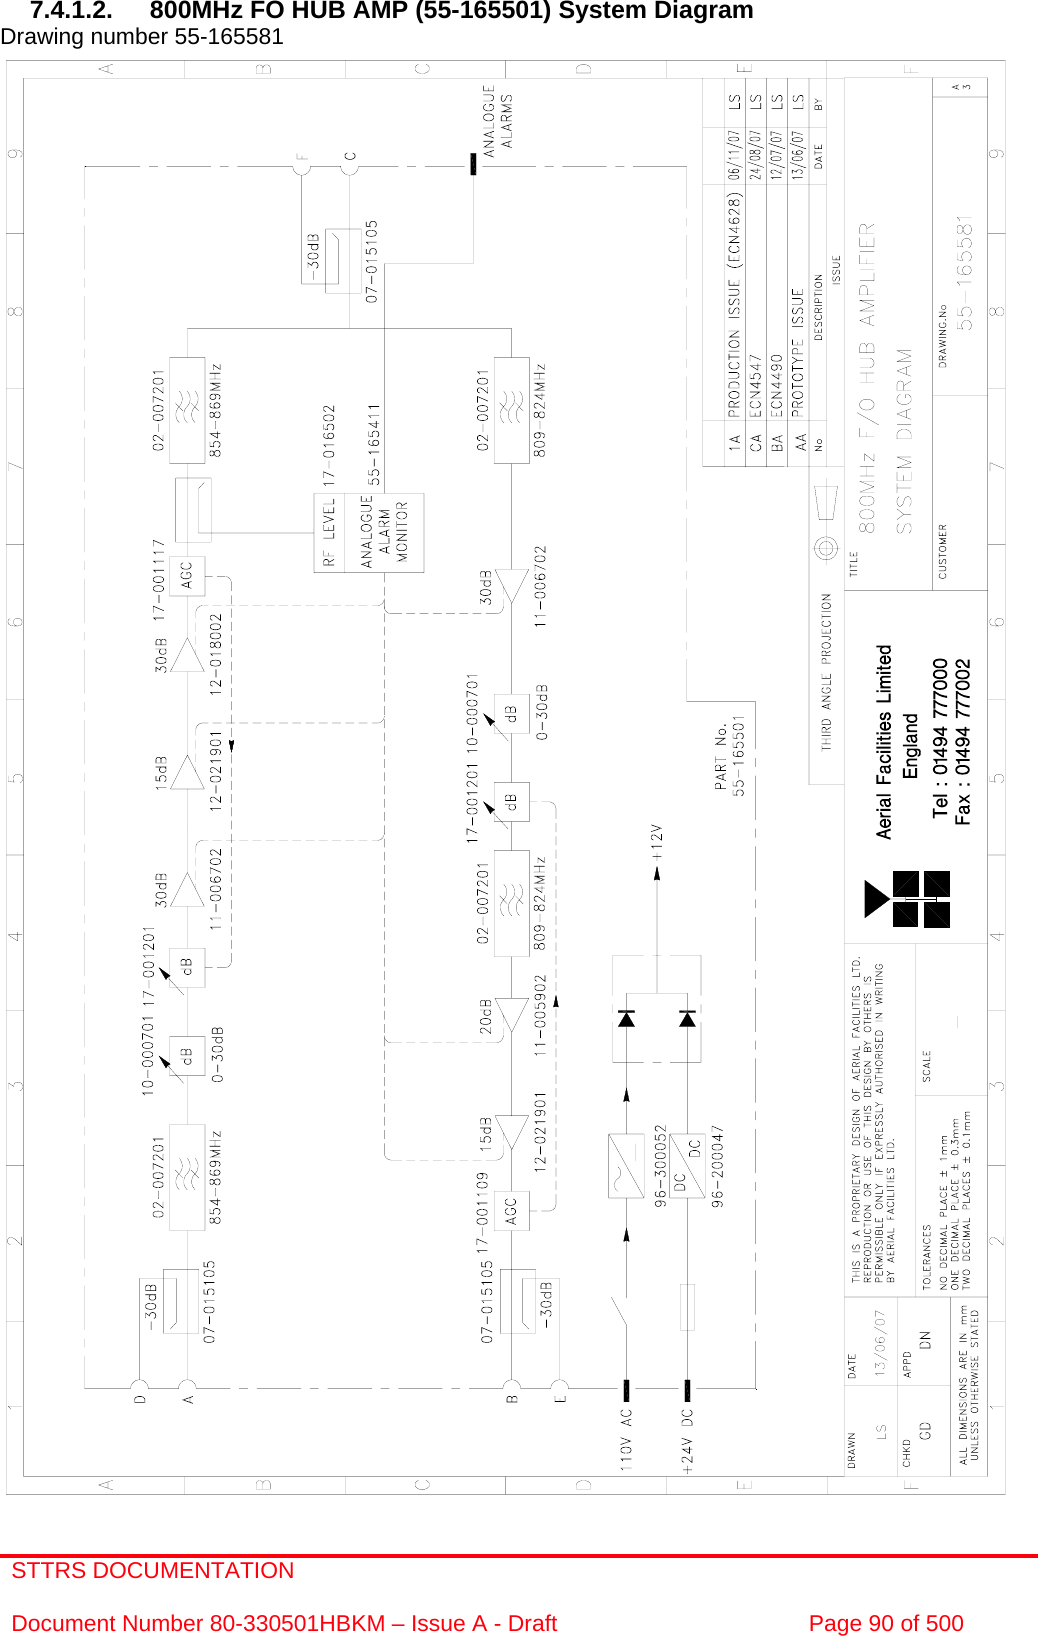 STTRS DOCUMENTATION  Document Number 80-330501HBKM – Issue A - Draft  Page 90 of 500   7.4.1.2.  800MHz FO HUB AMP (55-165501) System Diagram  Drawing number 55-165581                                                      